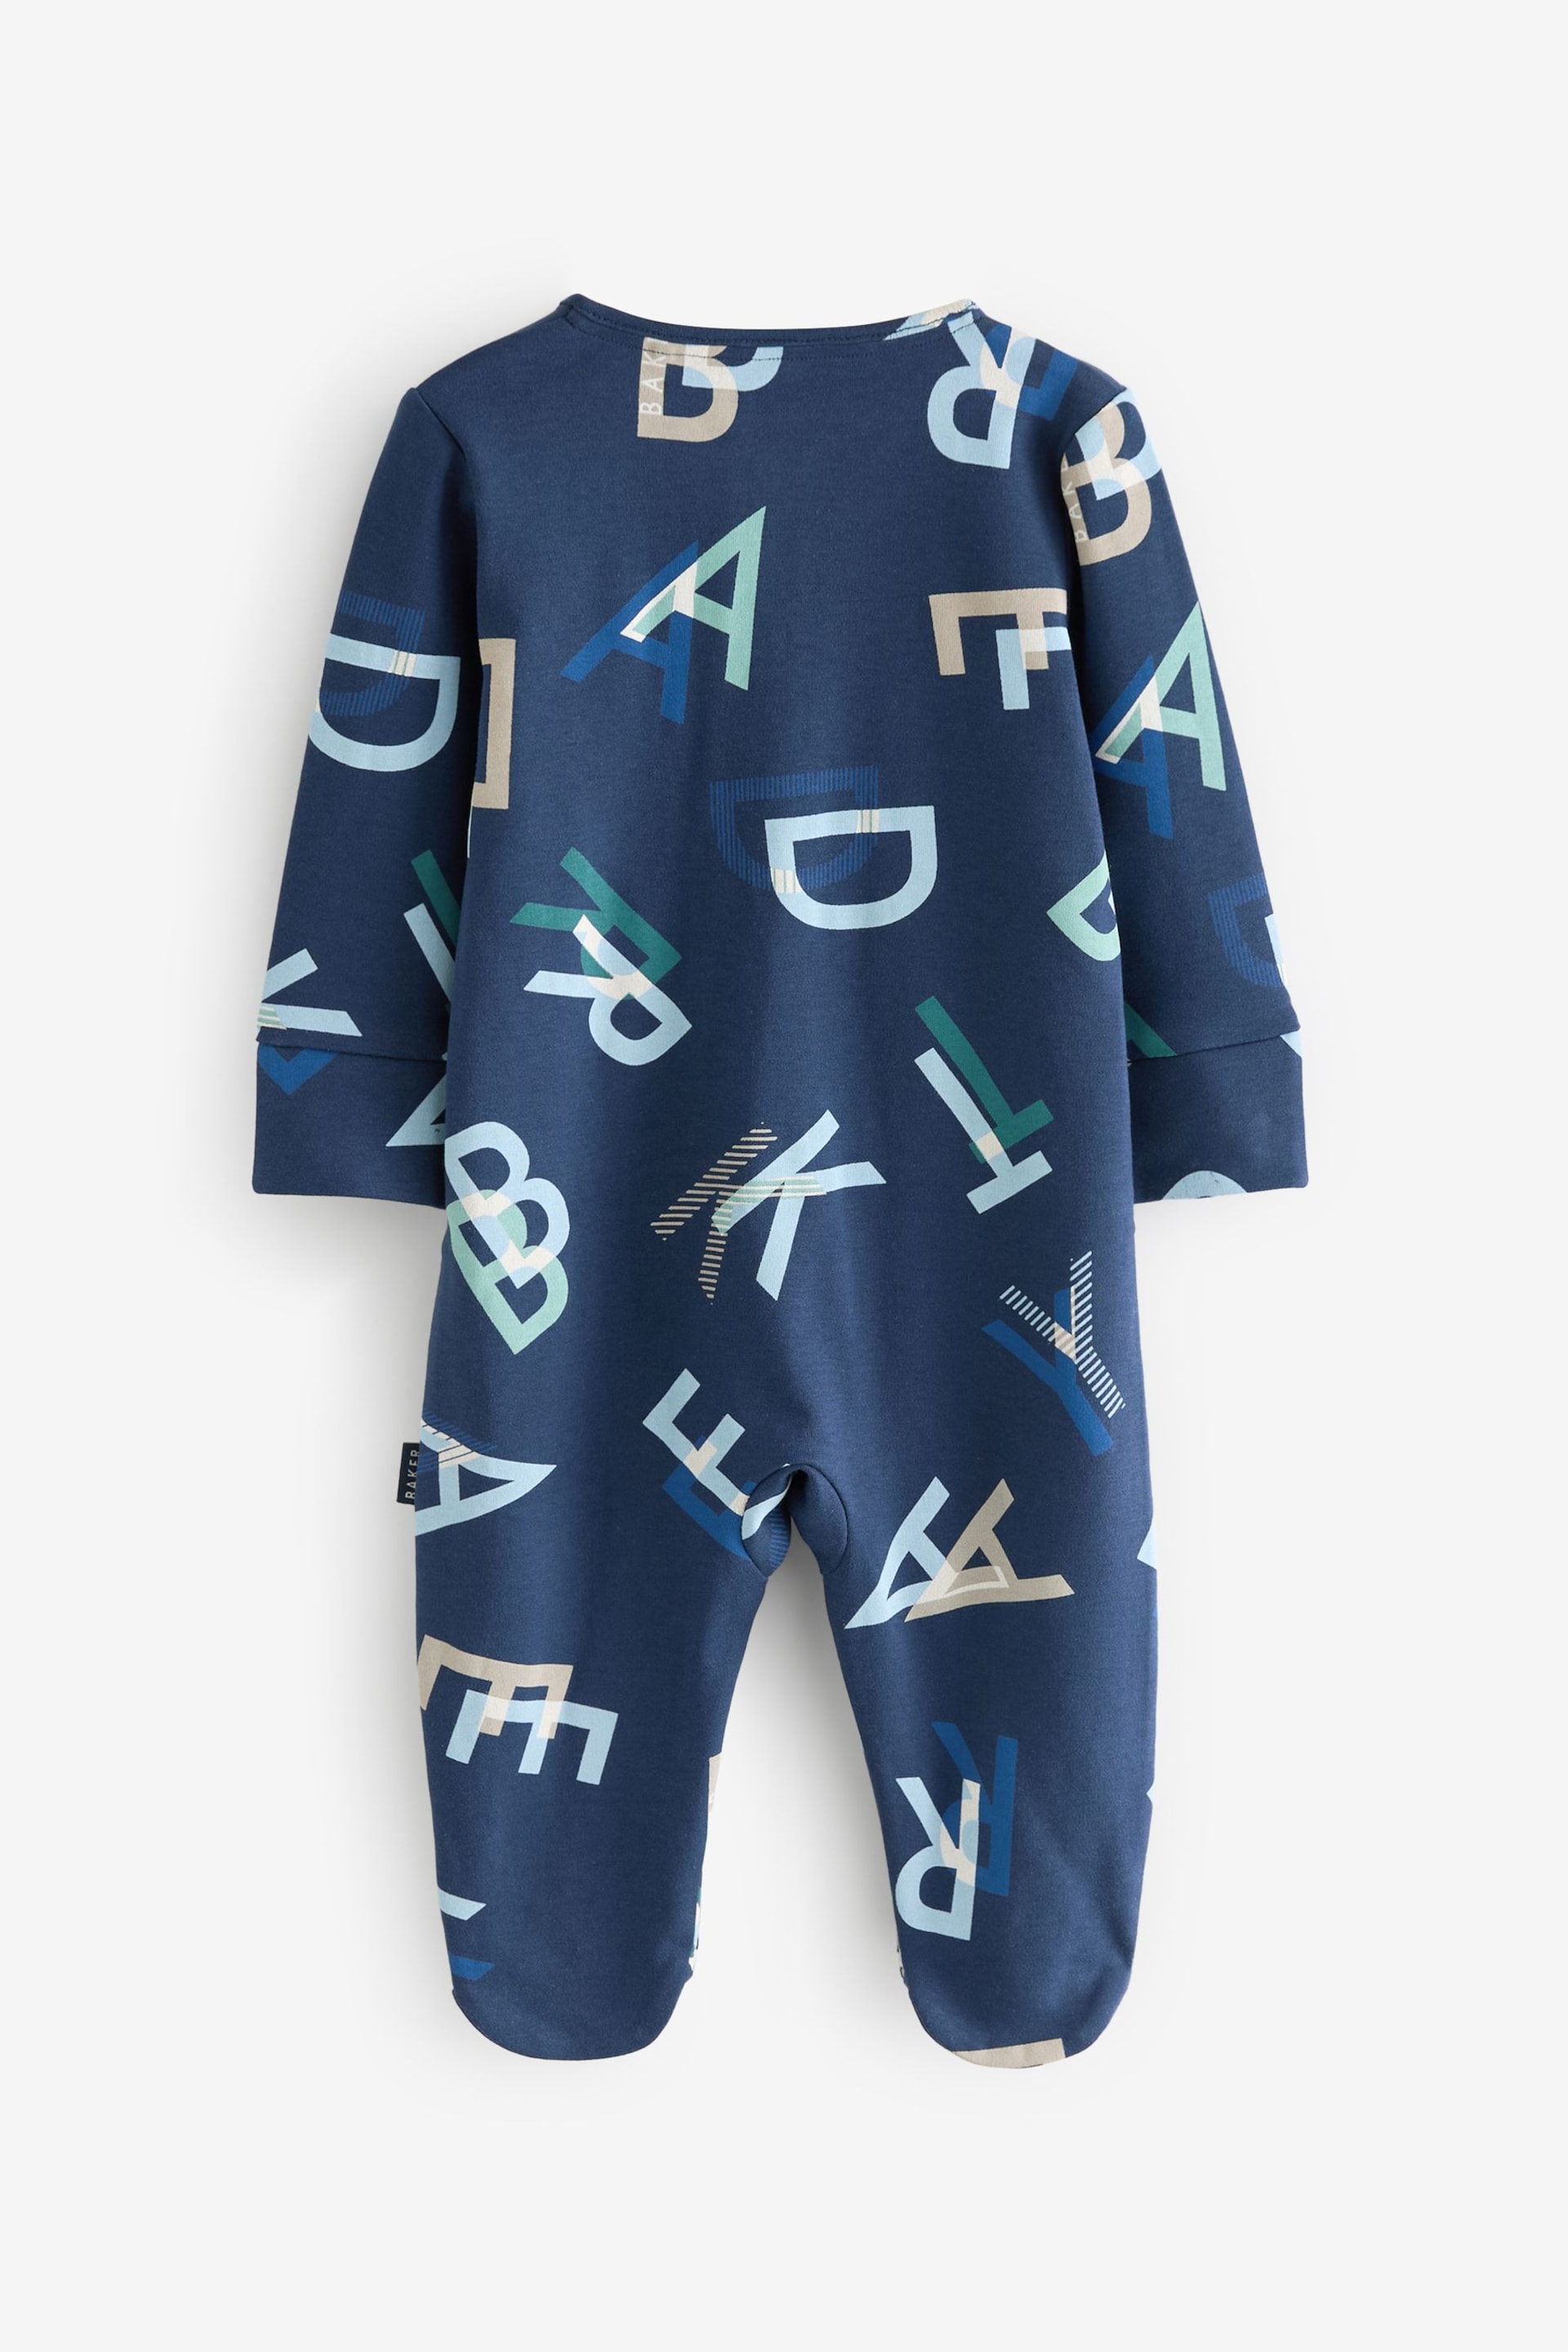 Baker by Ted Baker Sleepsuit 3 Pack - Image 5 of 7